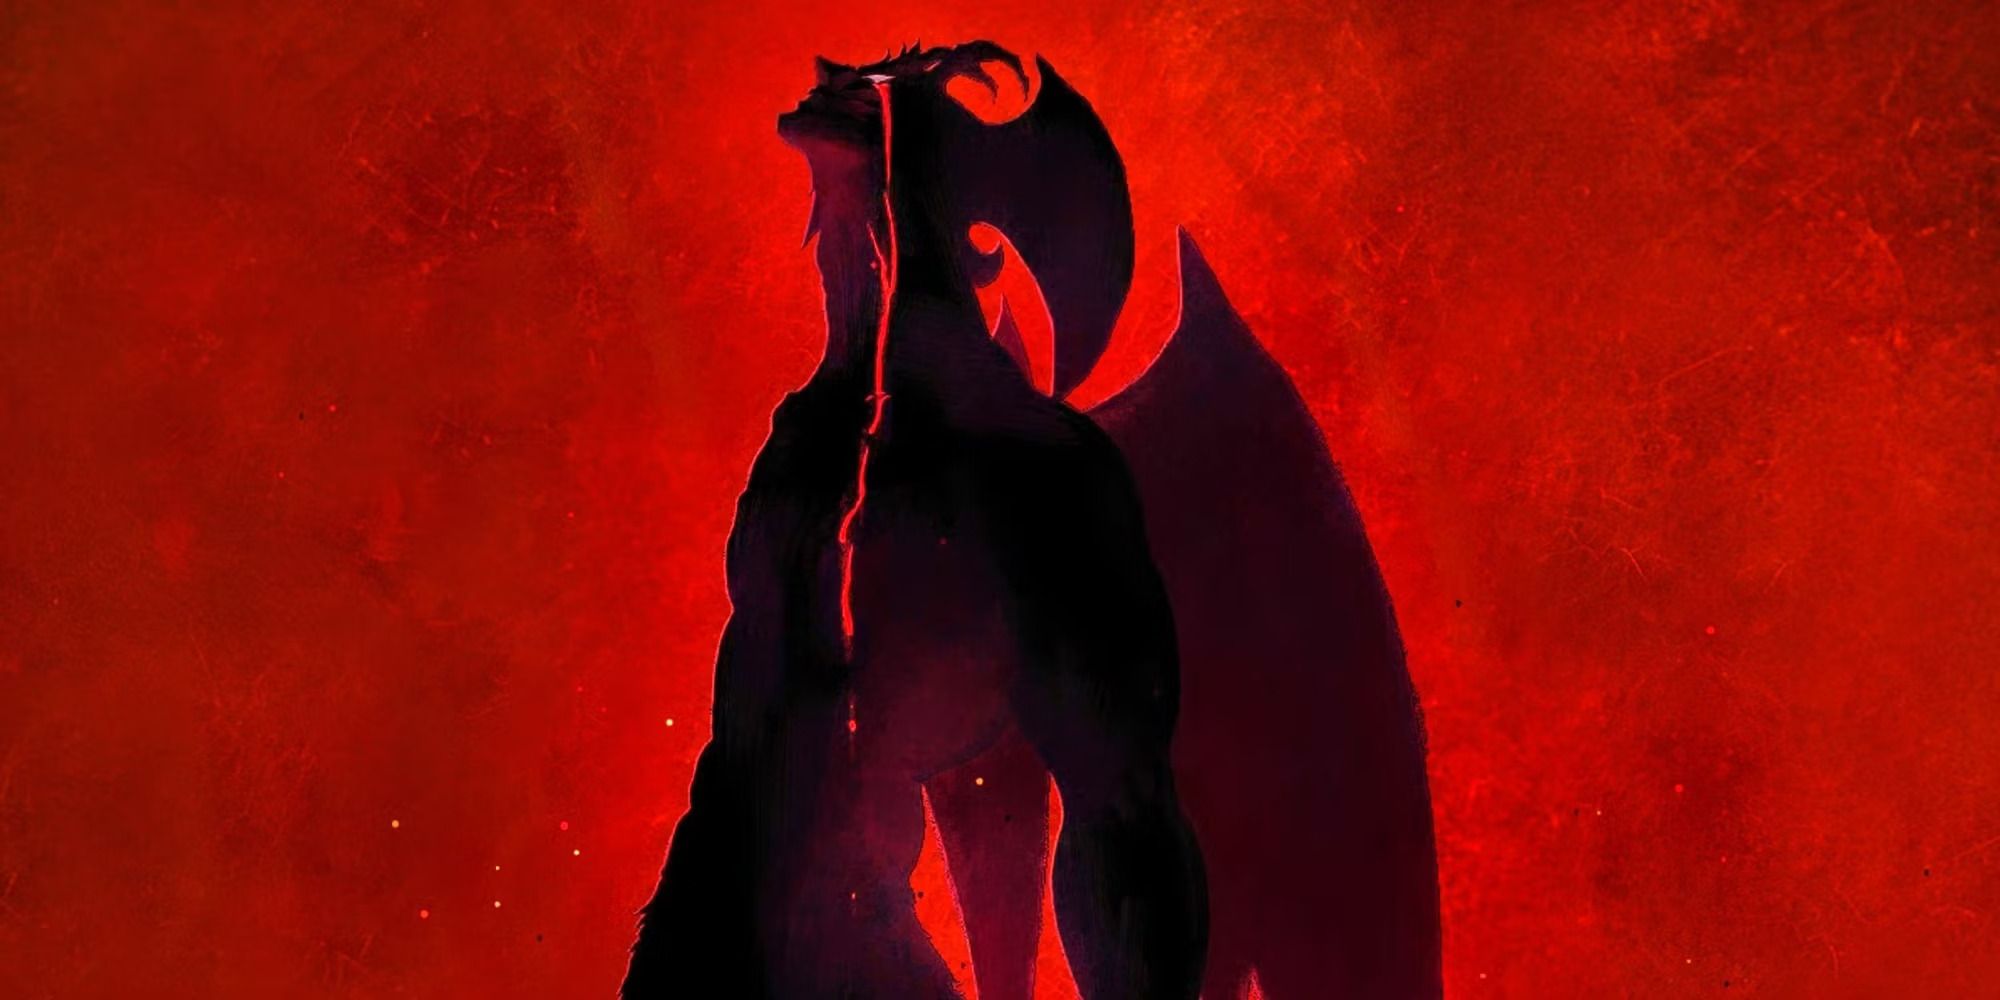 Promotional poster of Devilman crying from 'Devilman Crybaby'